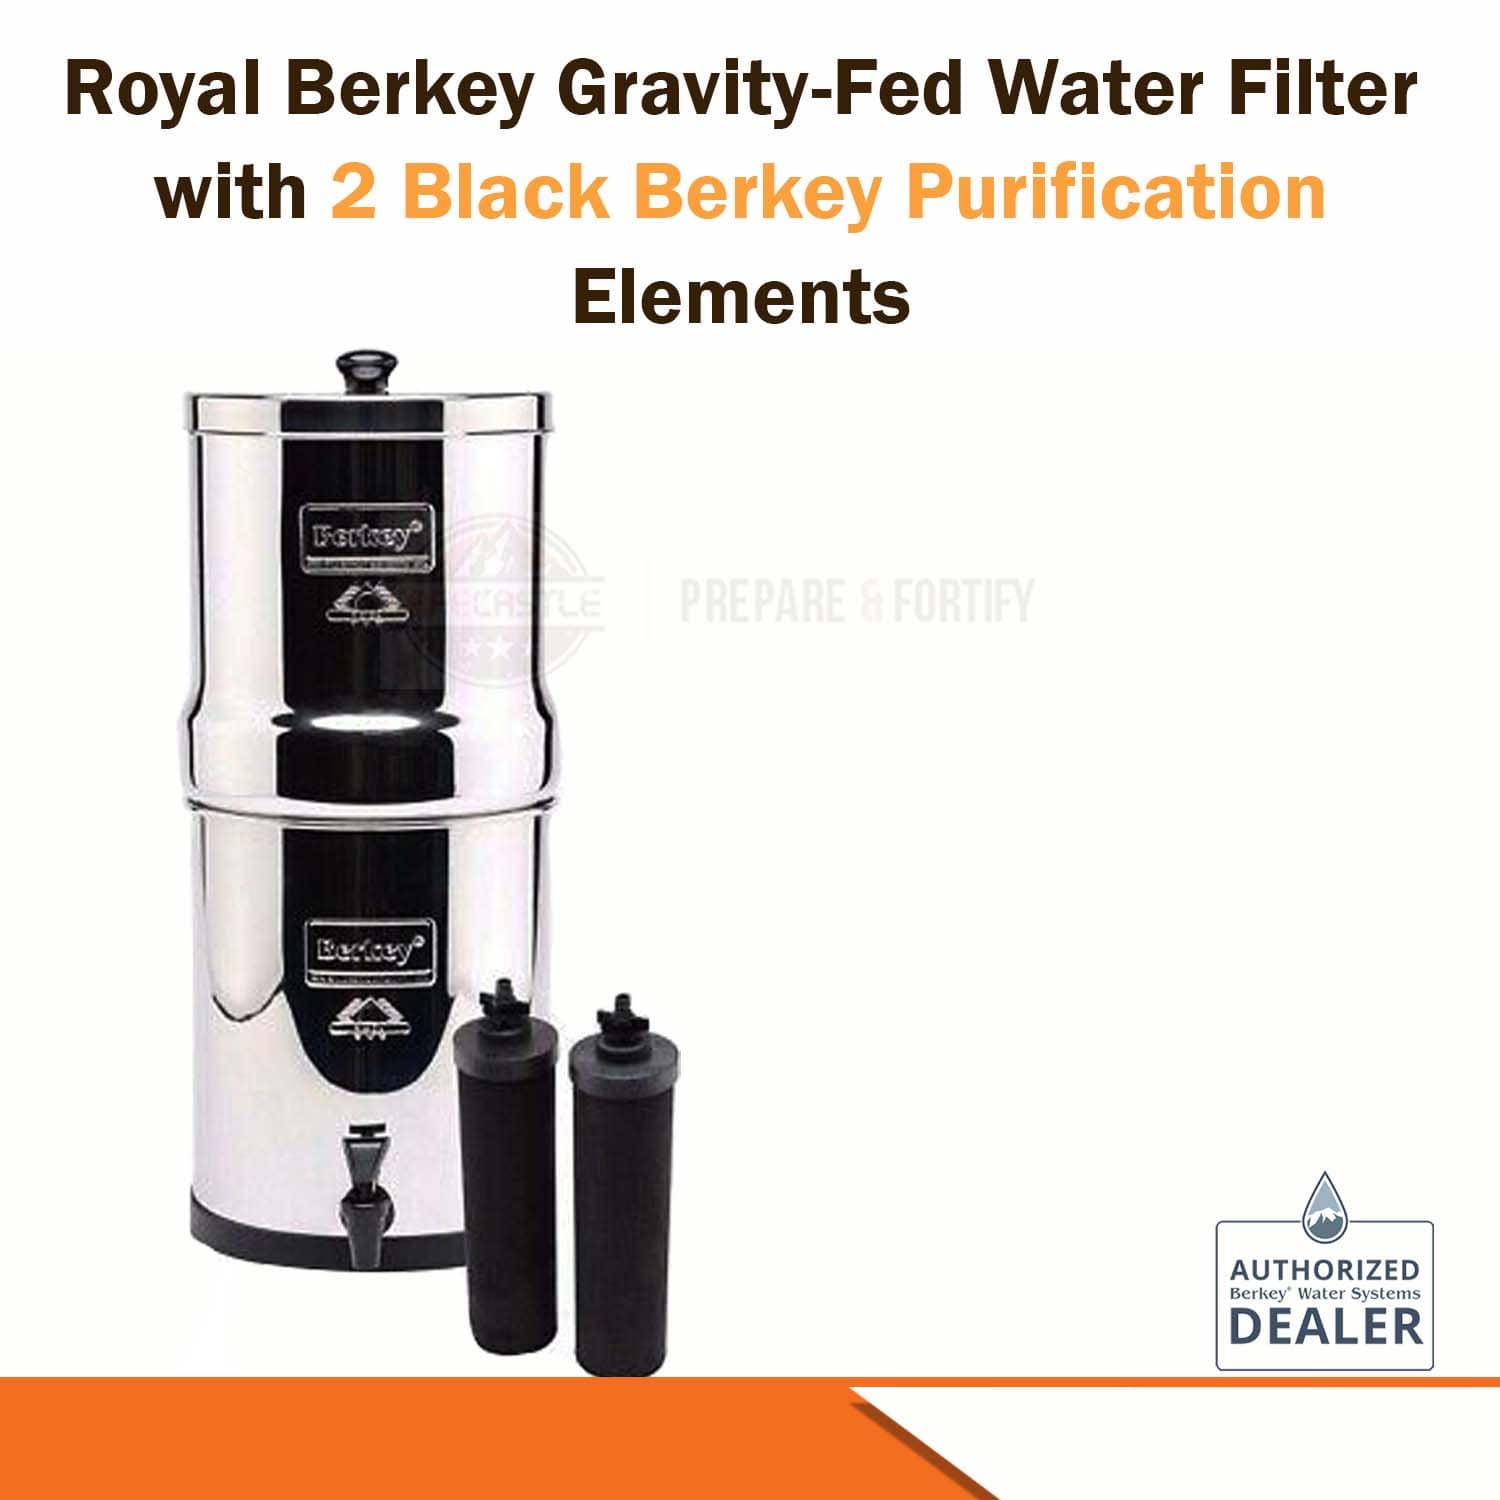 Big Berkey Unit Only - NEW (No Filters Included)